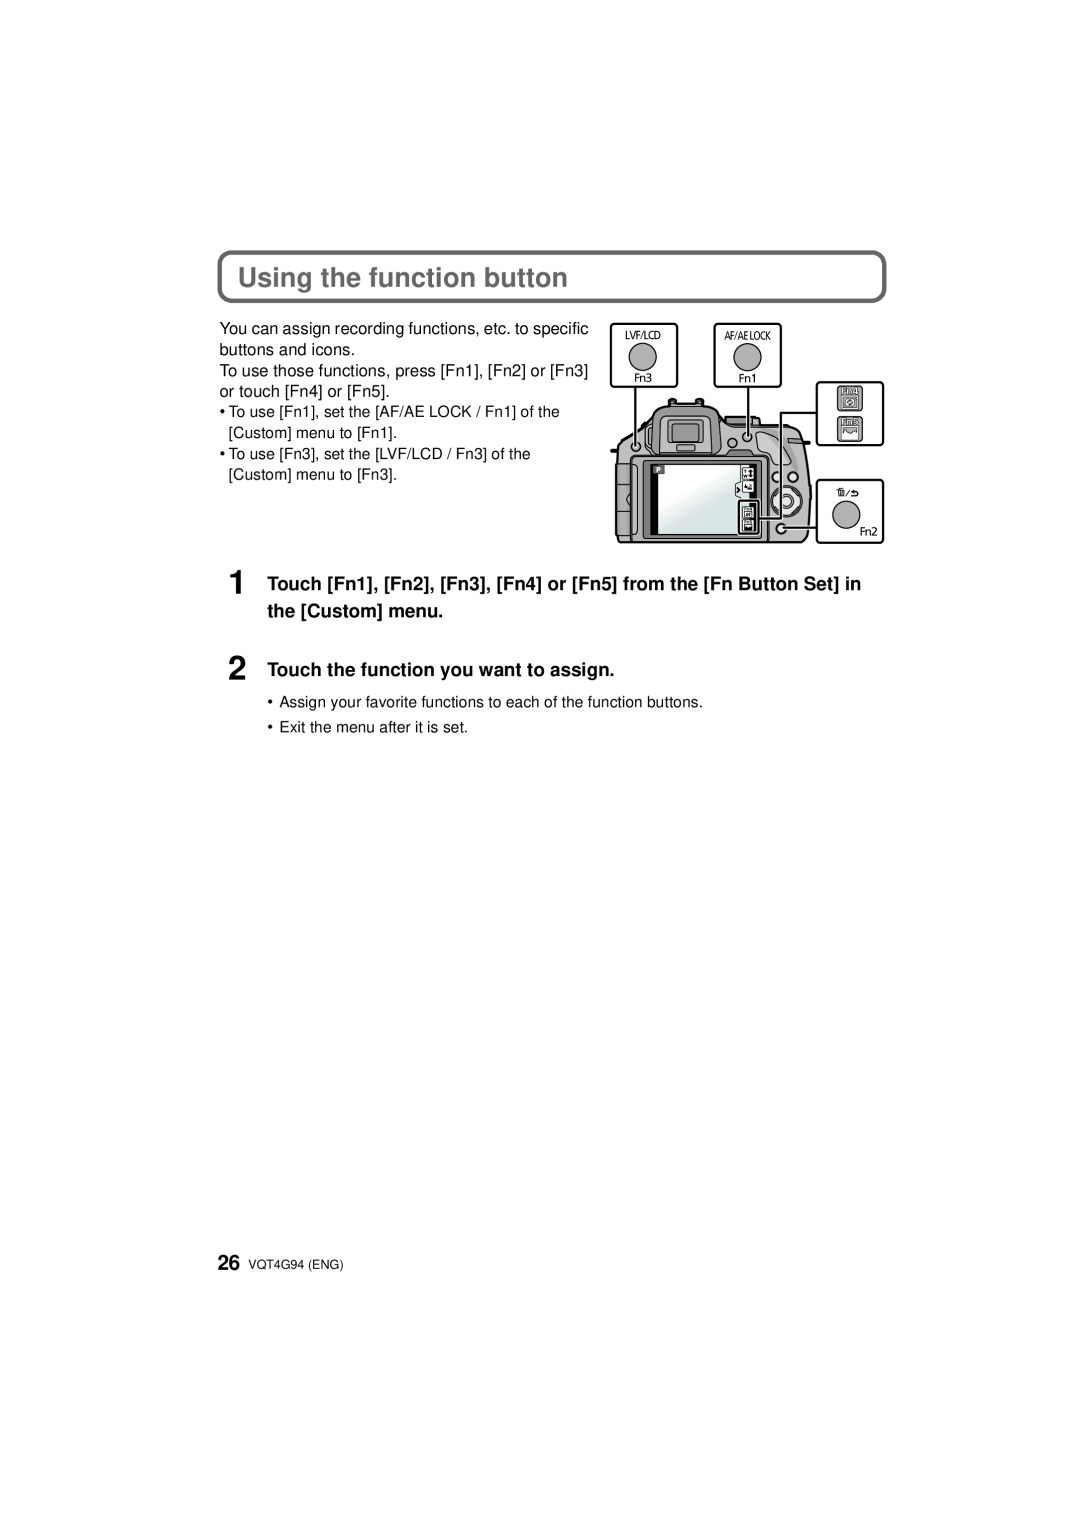 Panasonic DMC-G5X, DMC-G5-K, DMC-G5K owner manual Using the function button, Touch the function you want to assign 